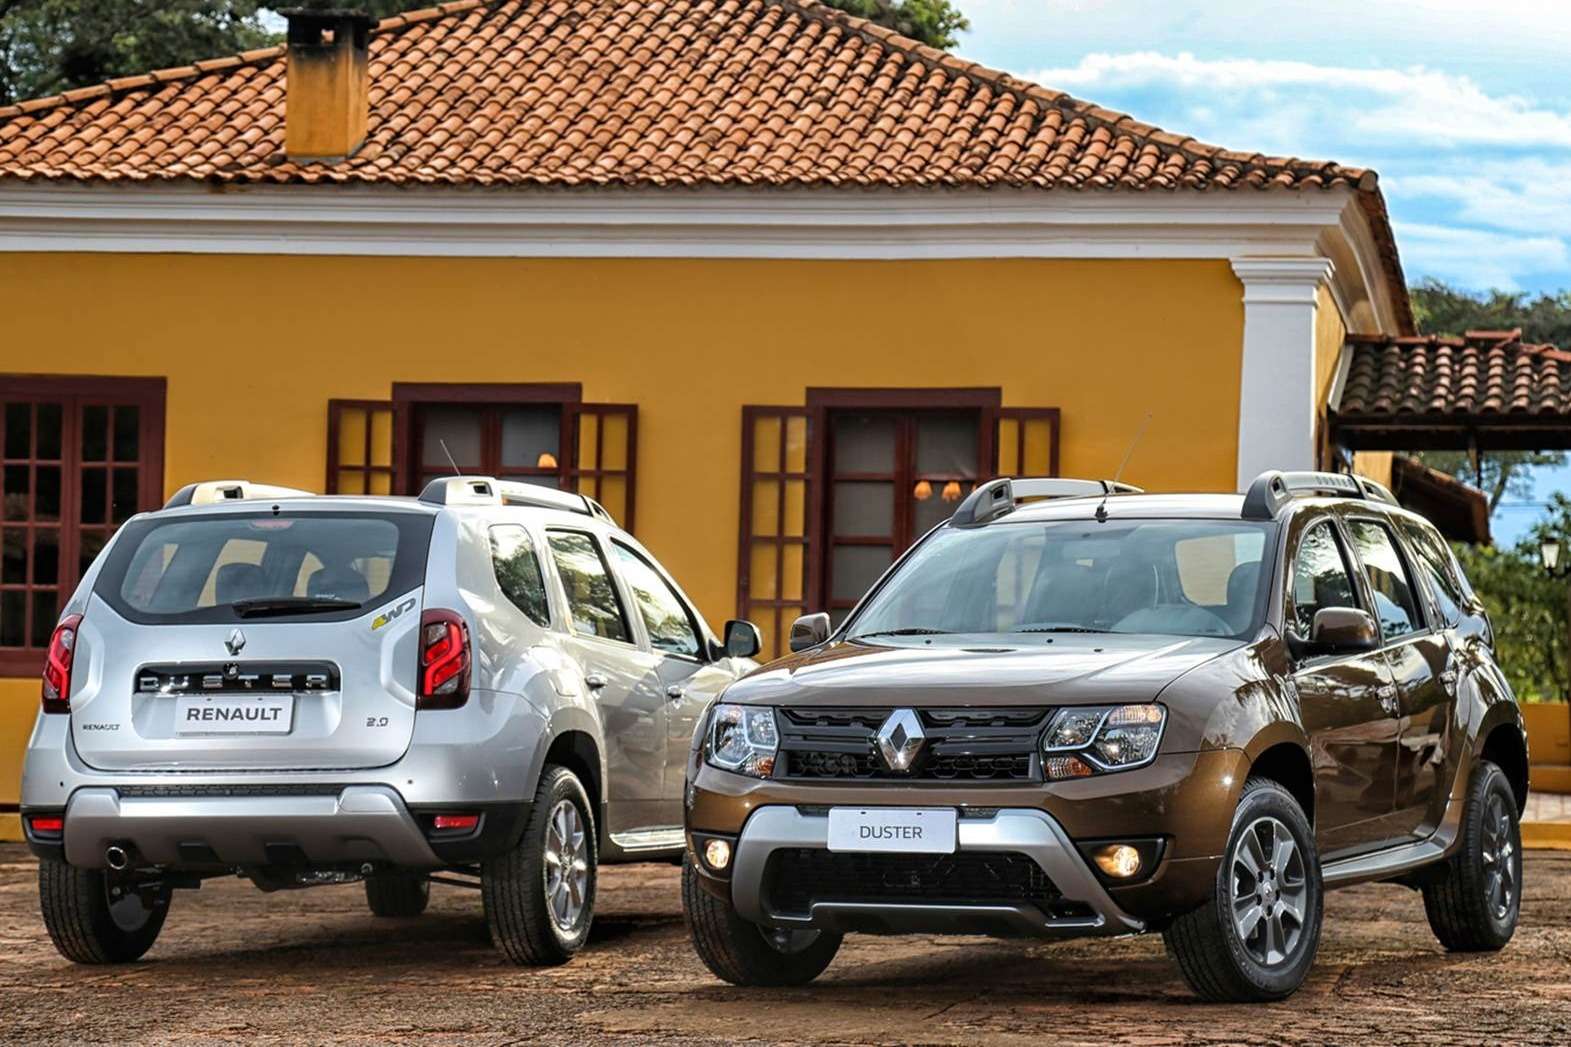 2016-renault-duster-launched-with-new-look-better-economy-in-brazil-photo-gallery_7